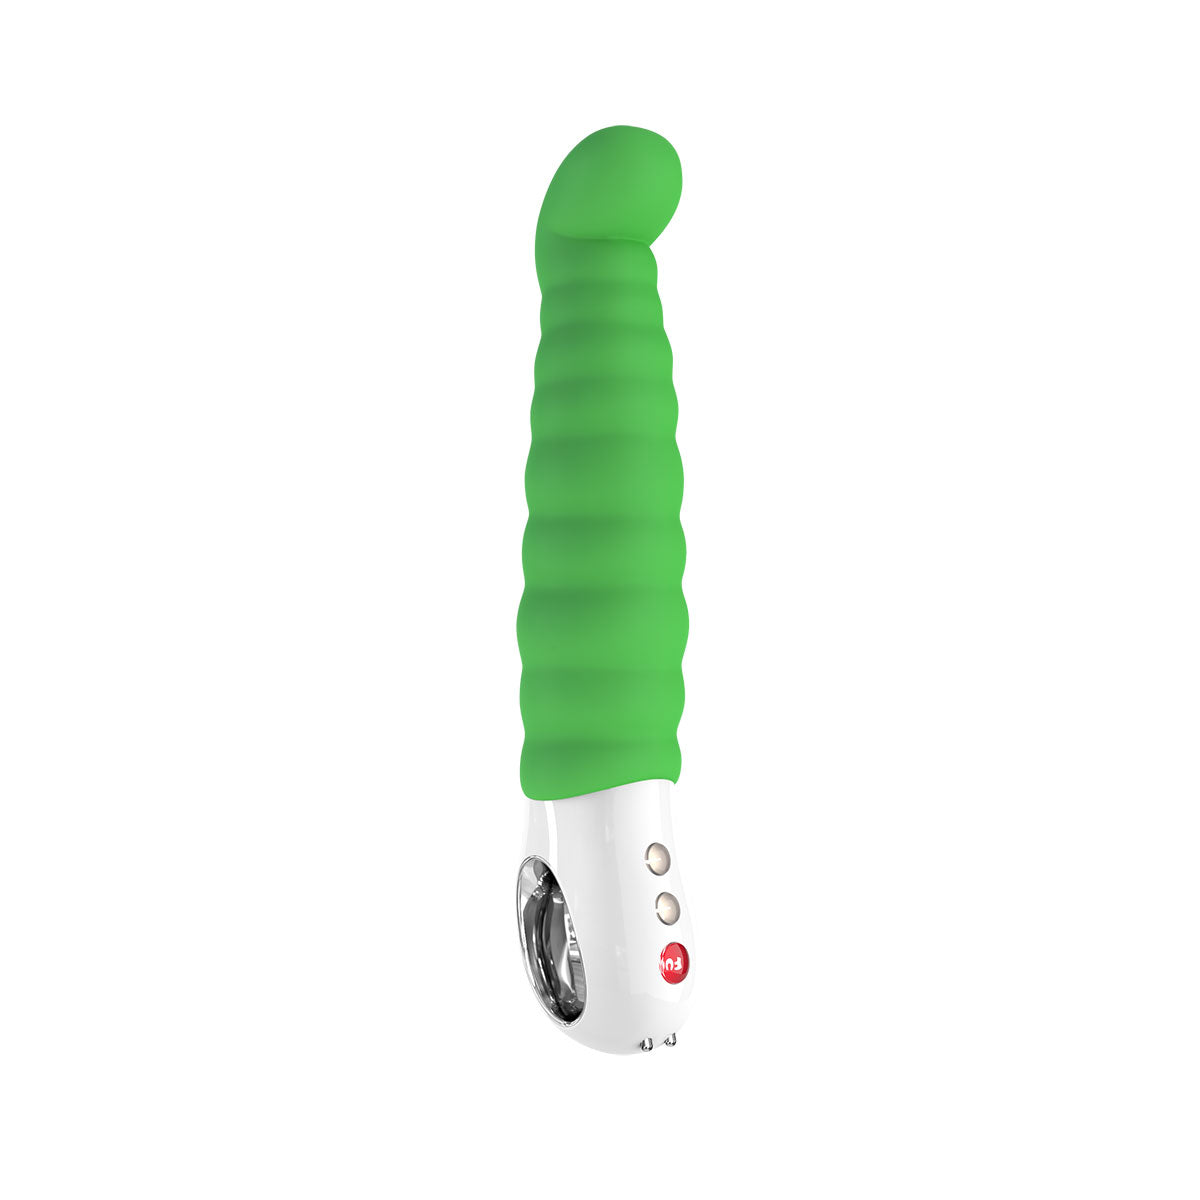 Patchy Paul - G-Spot Vibrator by Fun Factory